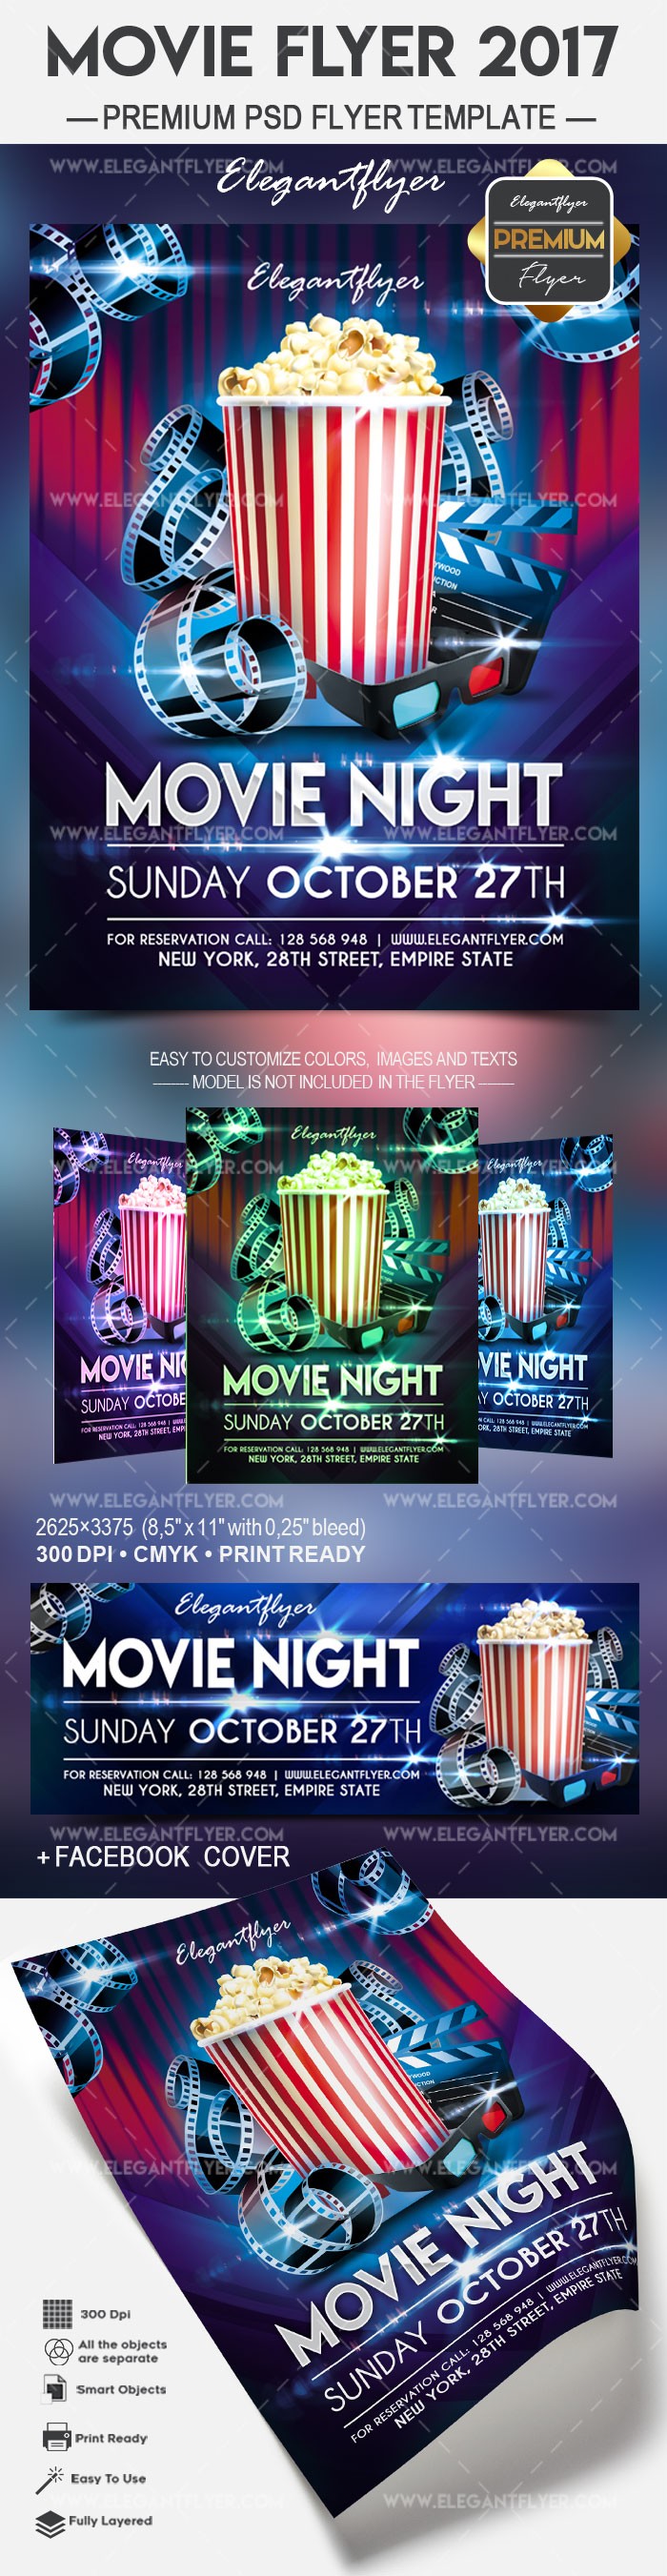 Red and Blue Movie Flyer by ElegantFlyer